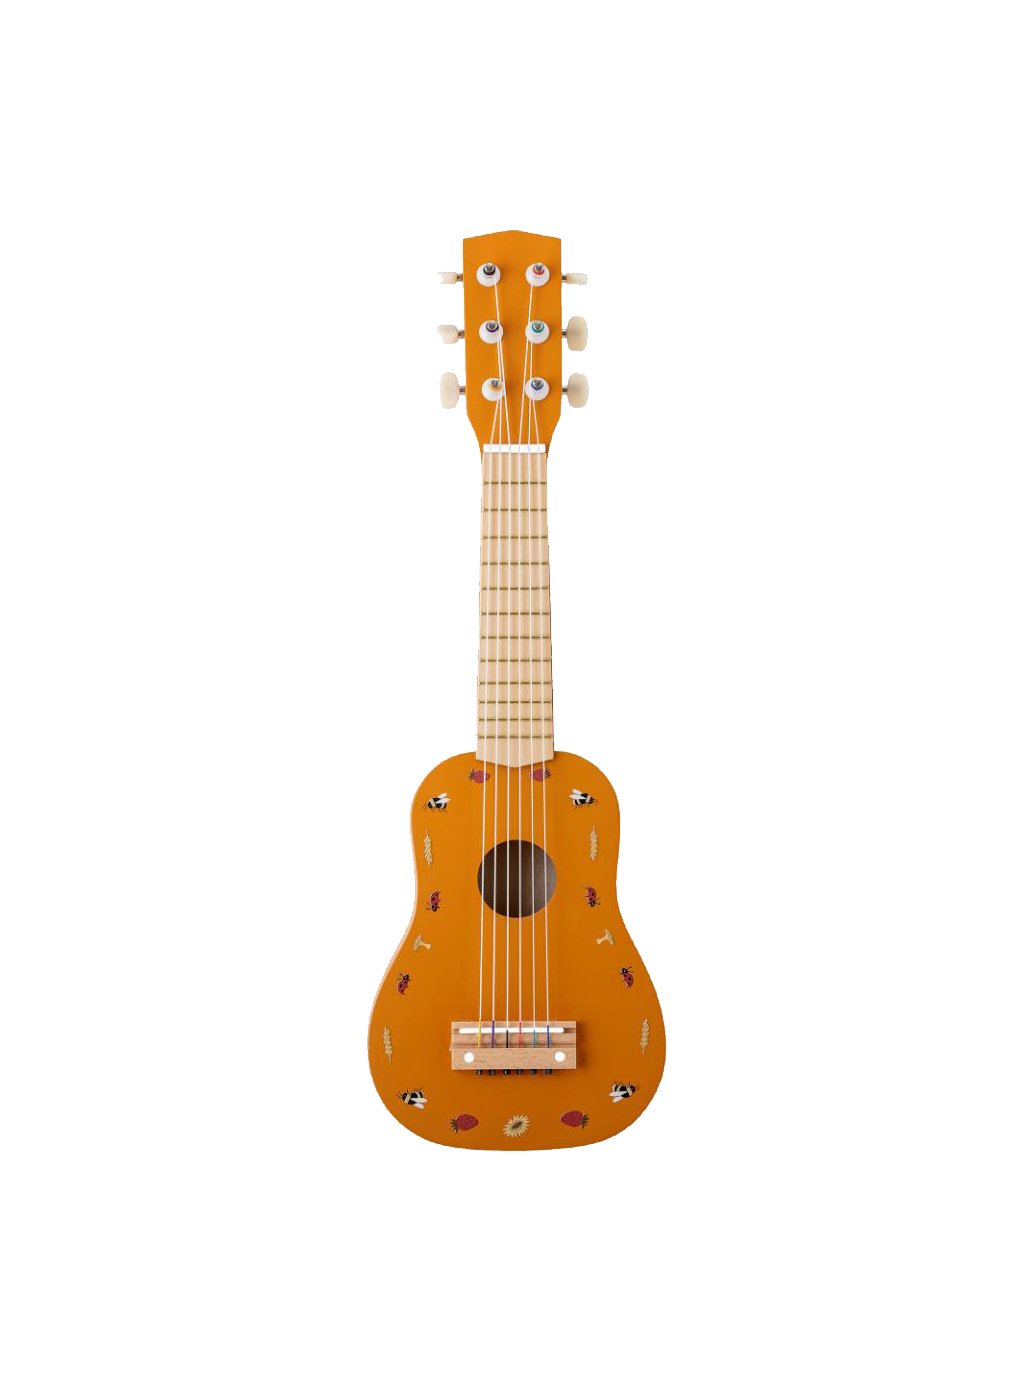 Abbe toy guitar